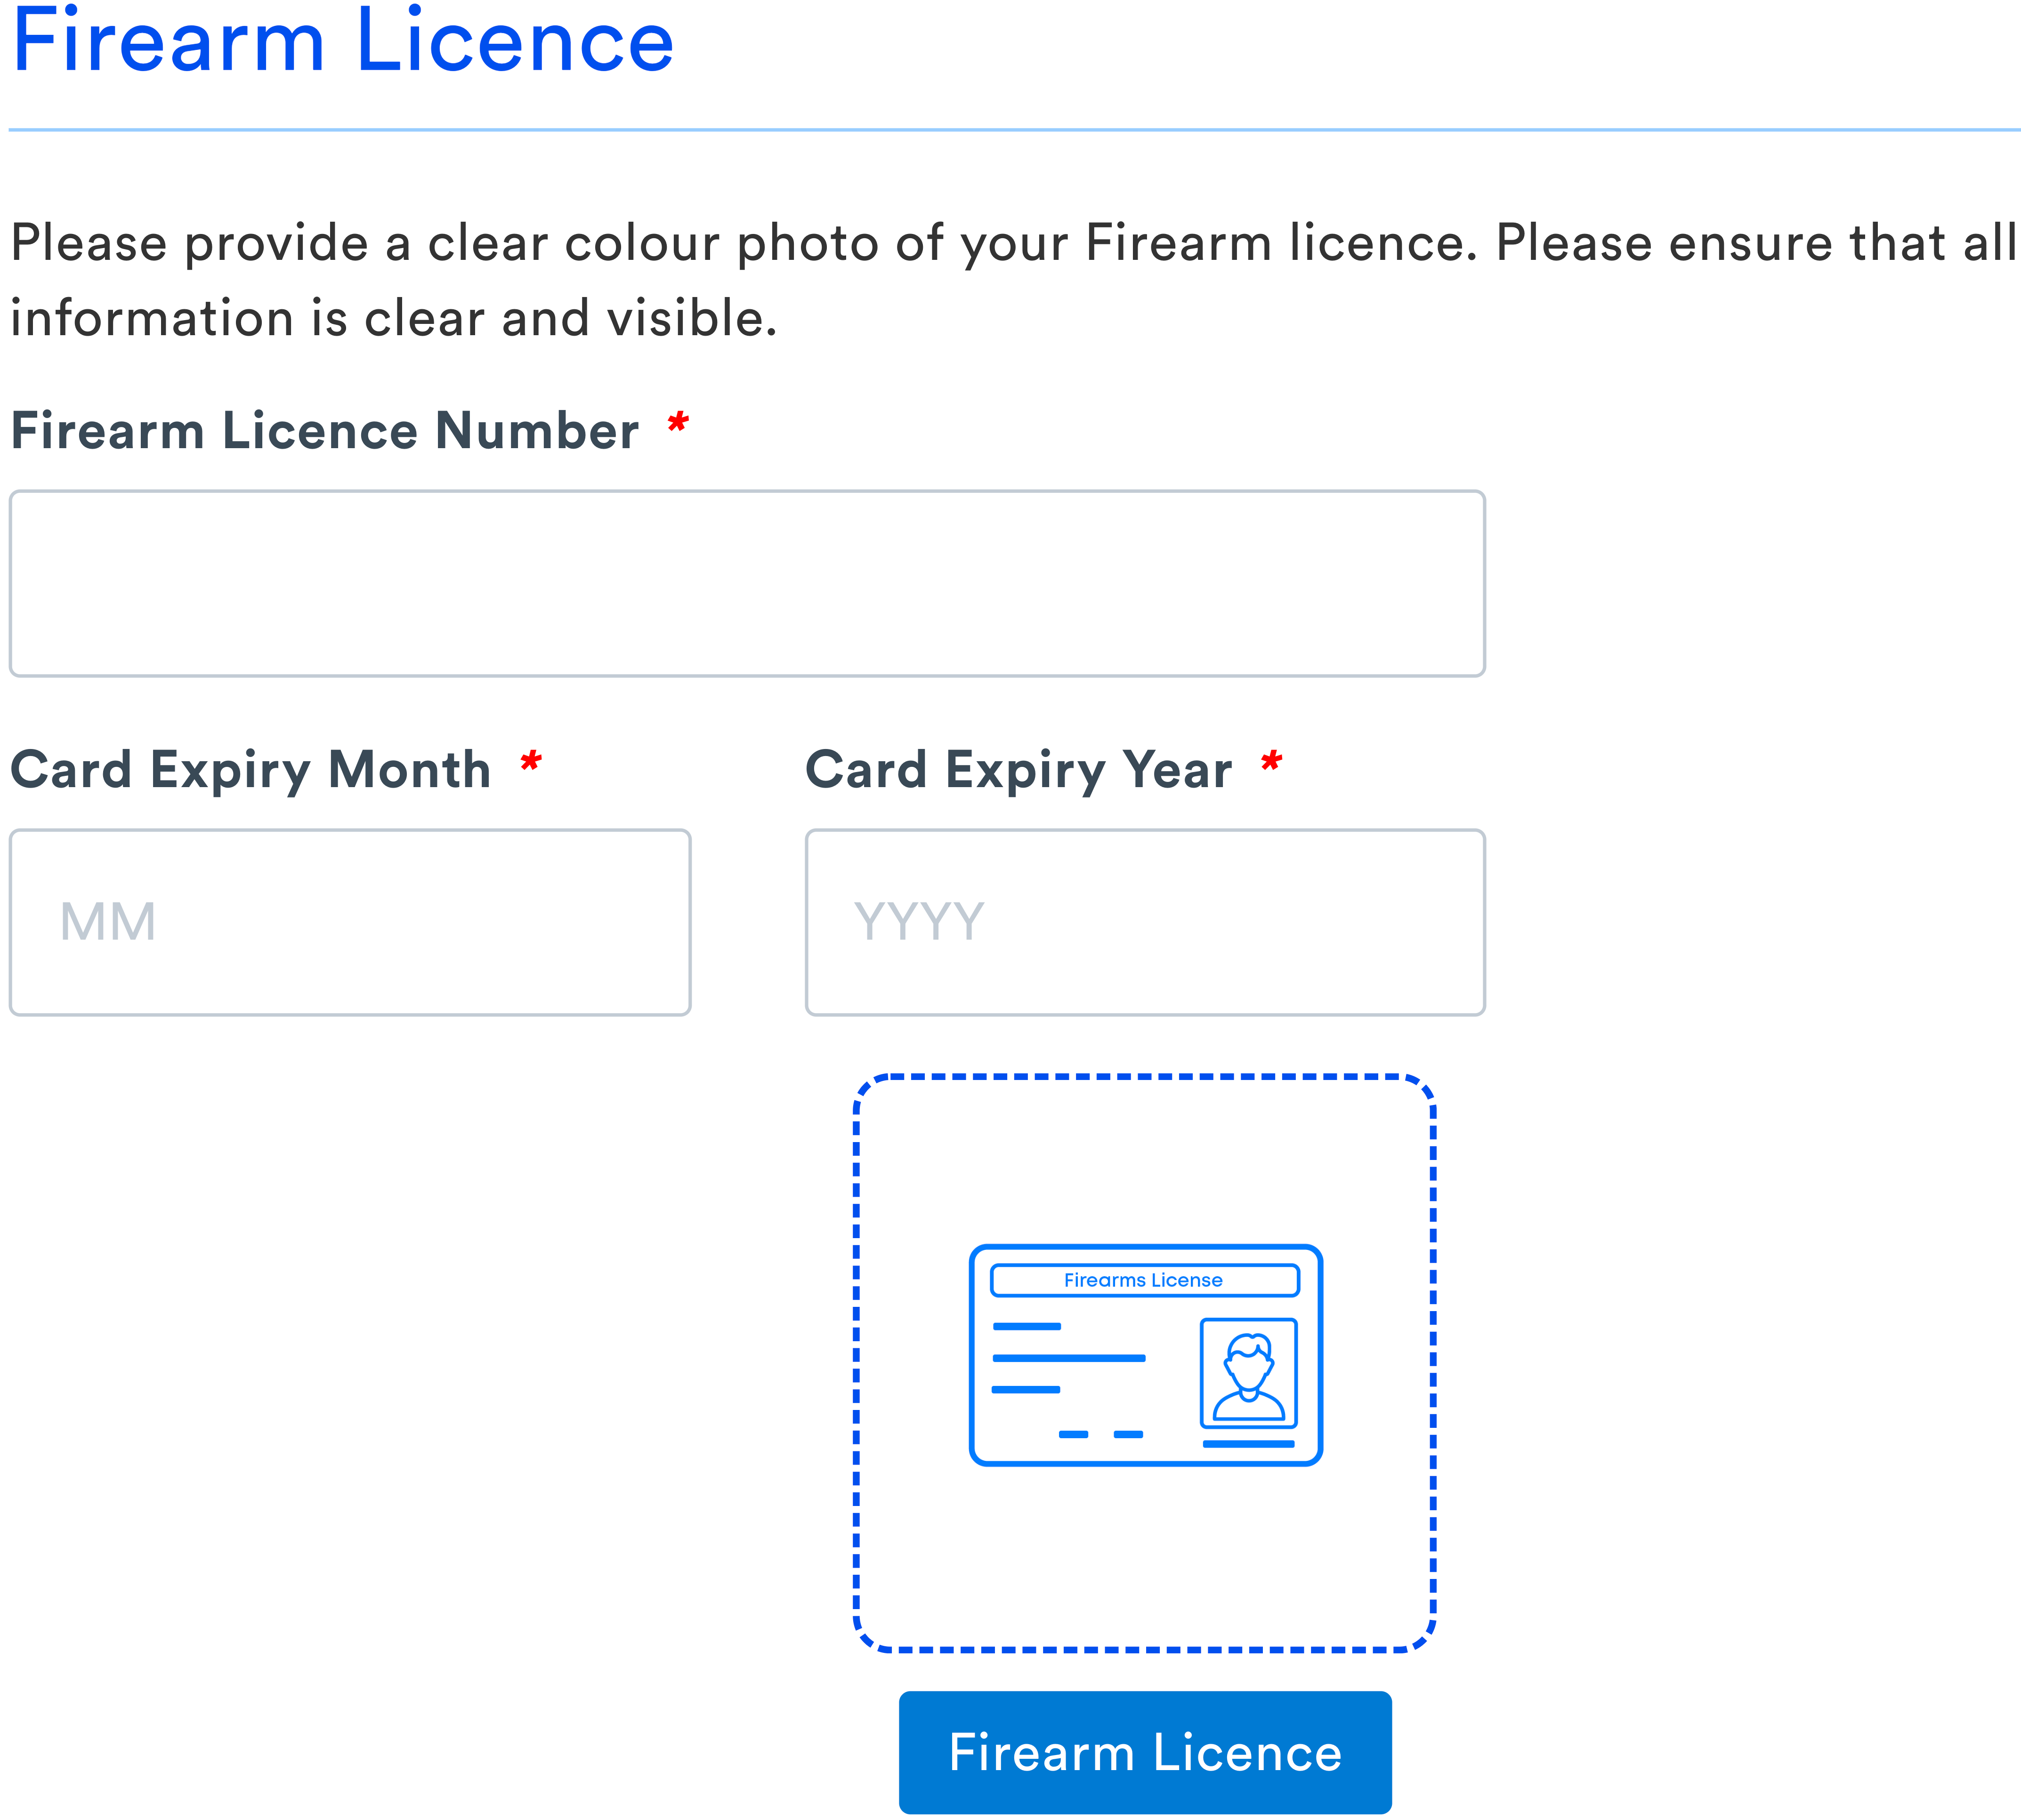 Firearms_Licence.png